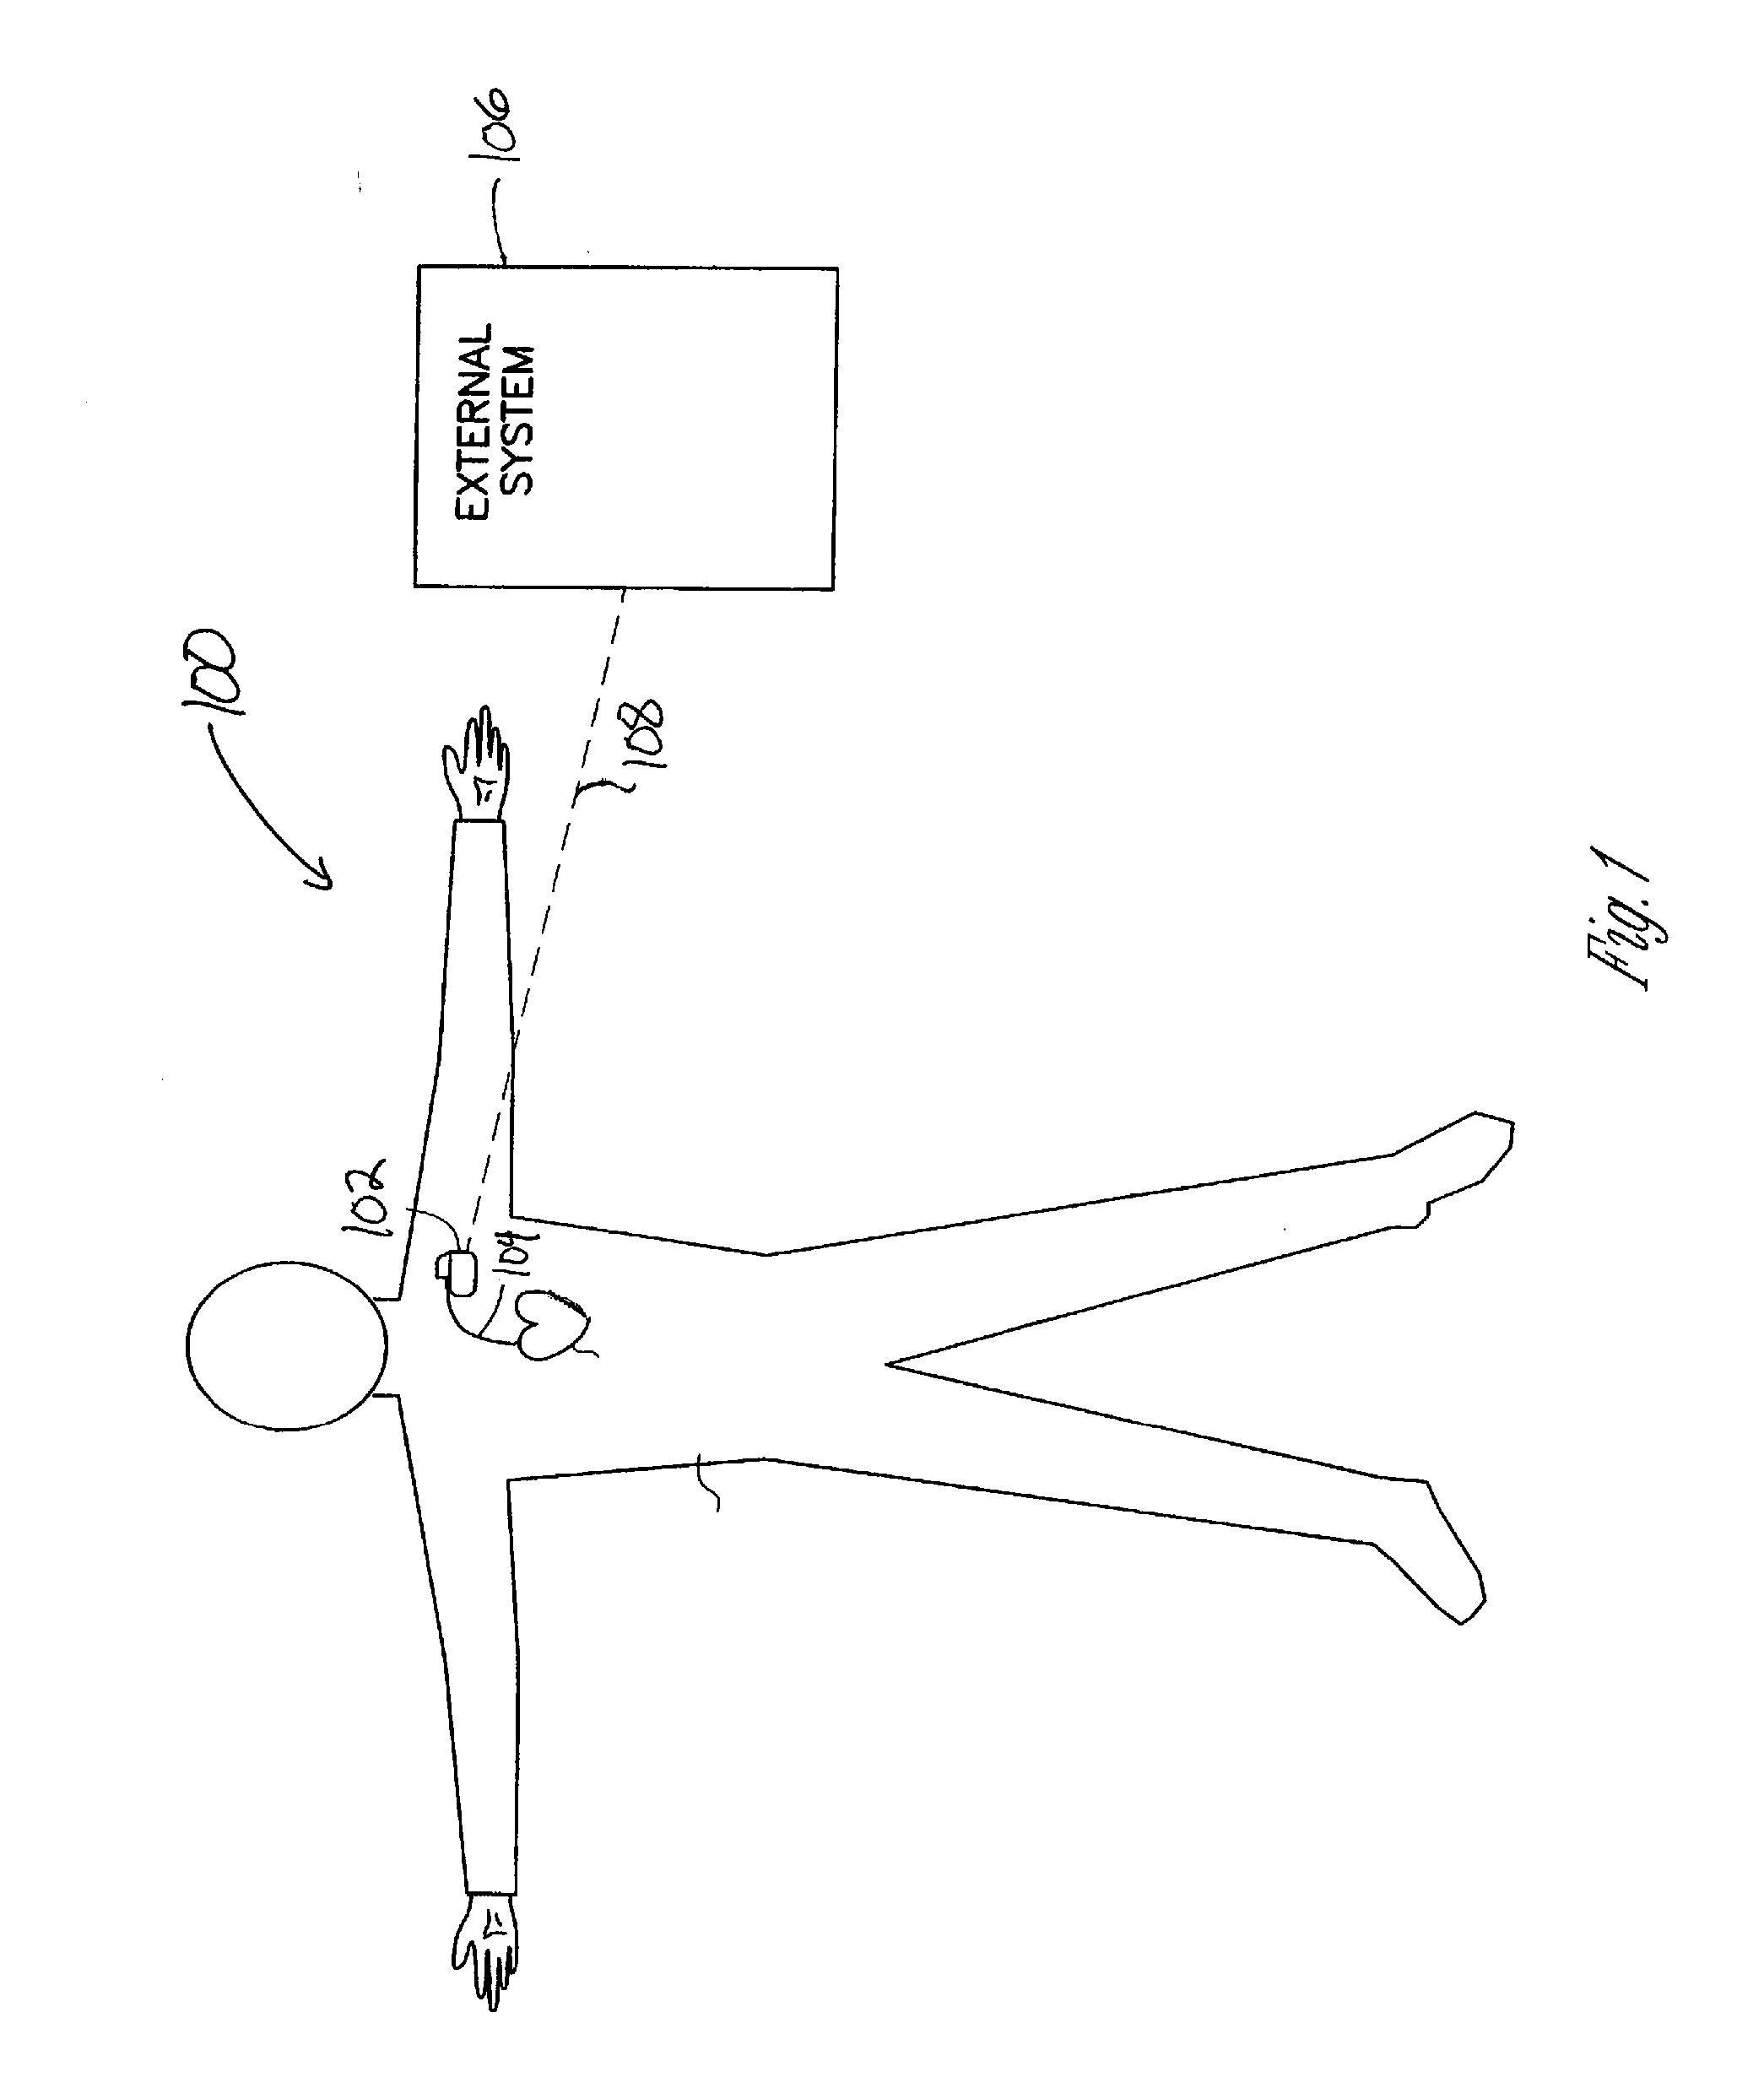 Physiological event detection systems and methods